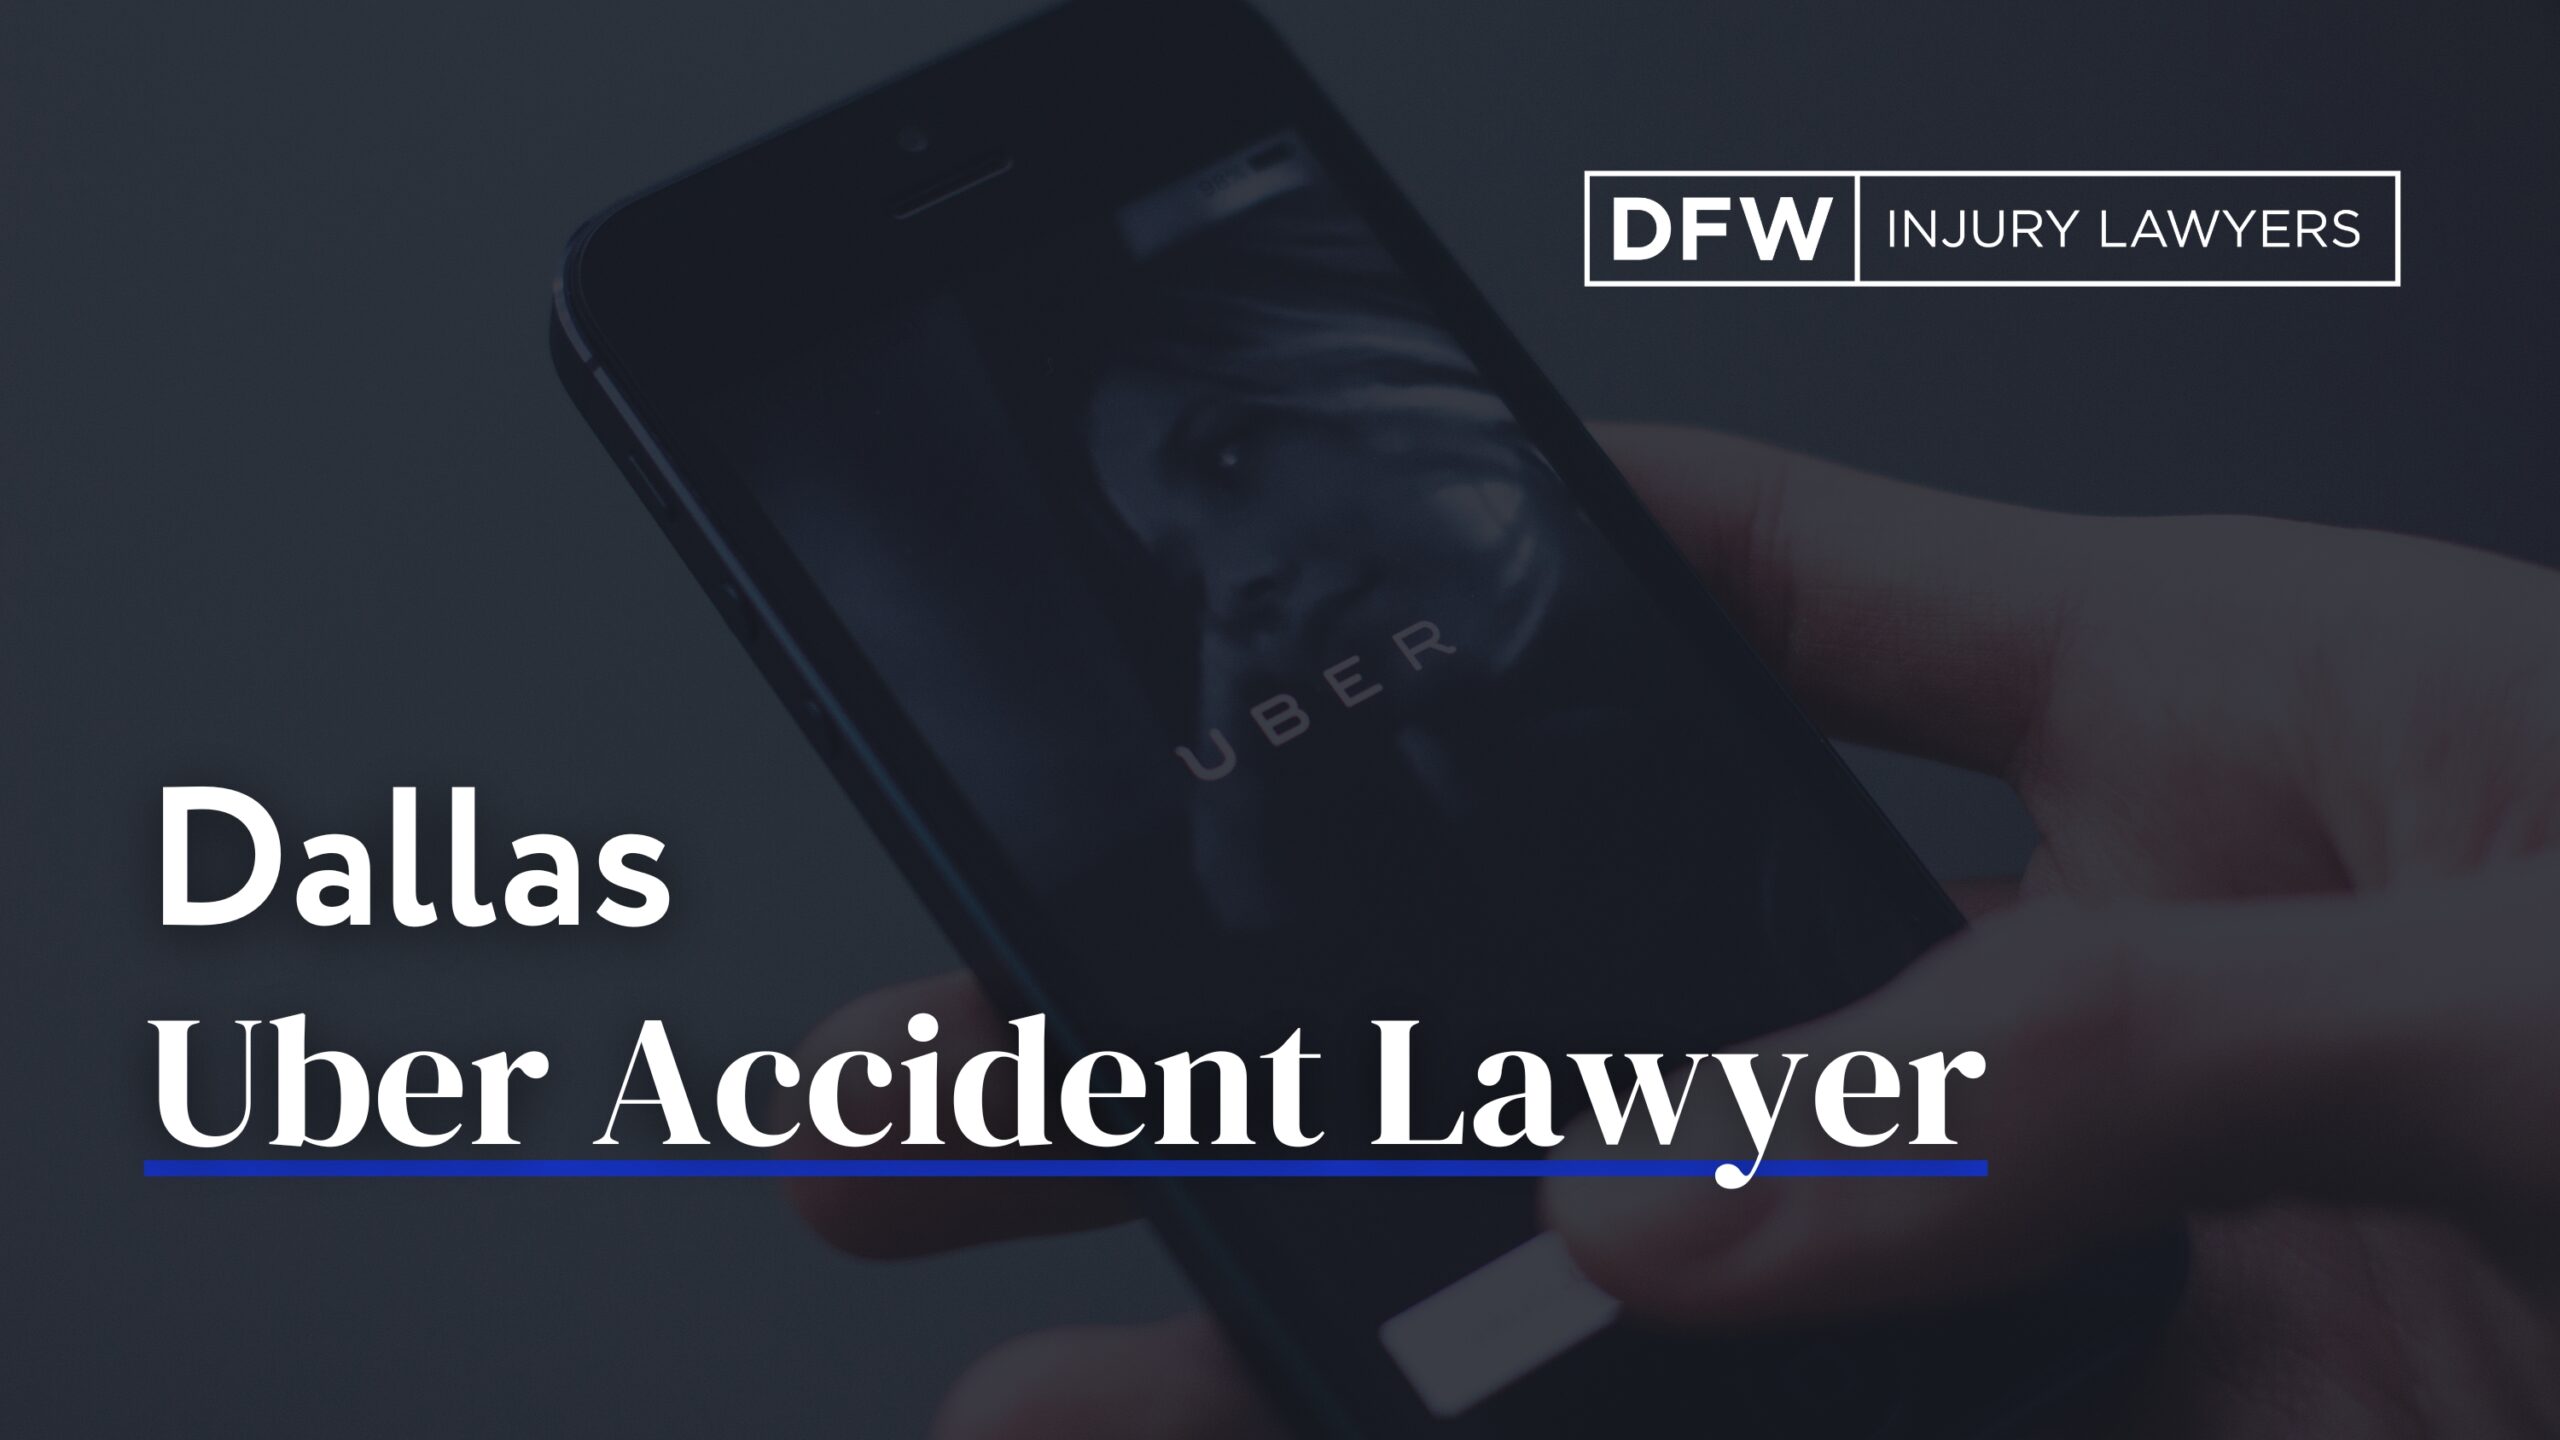 Dallas Uber Accident Lawyer - DFW